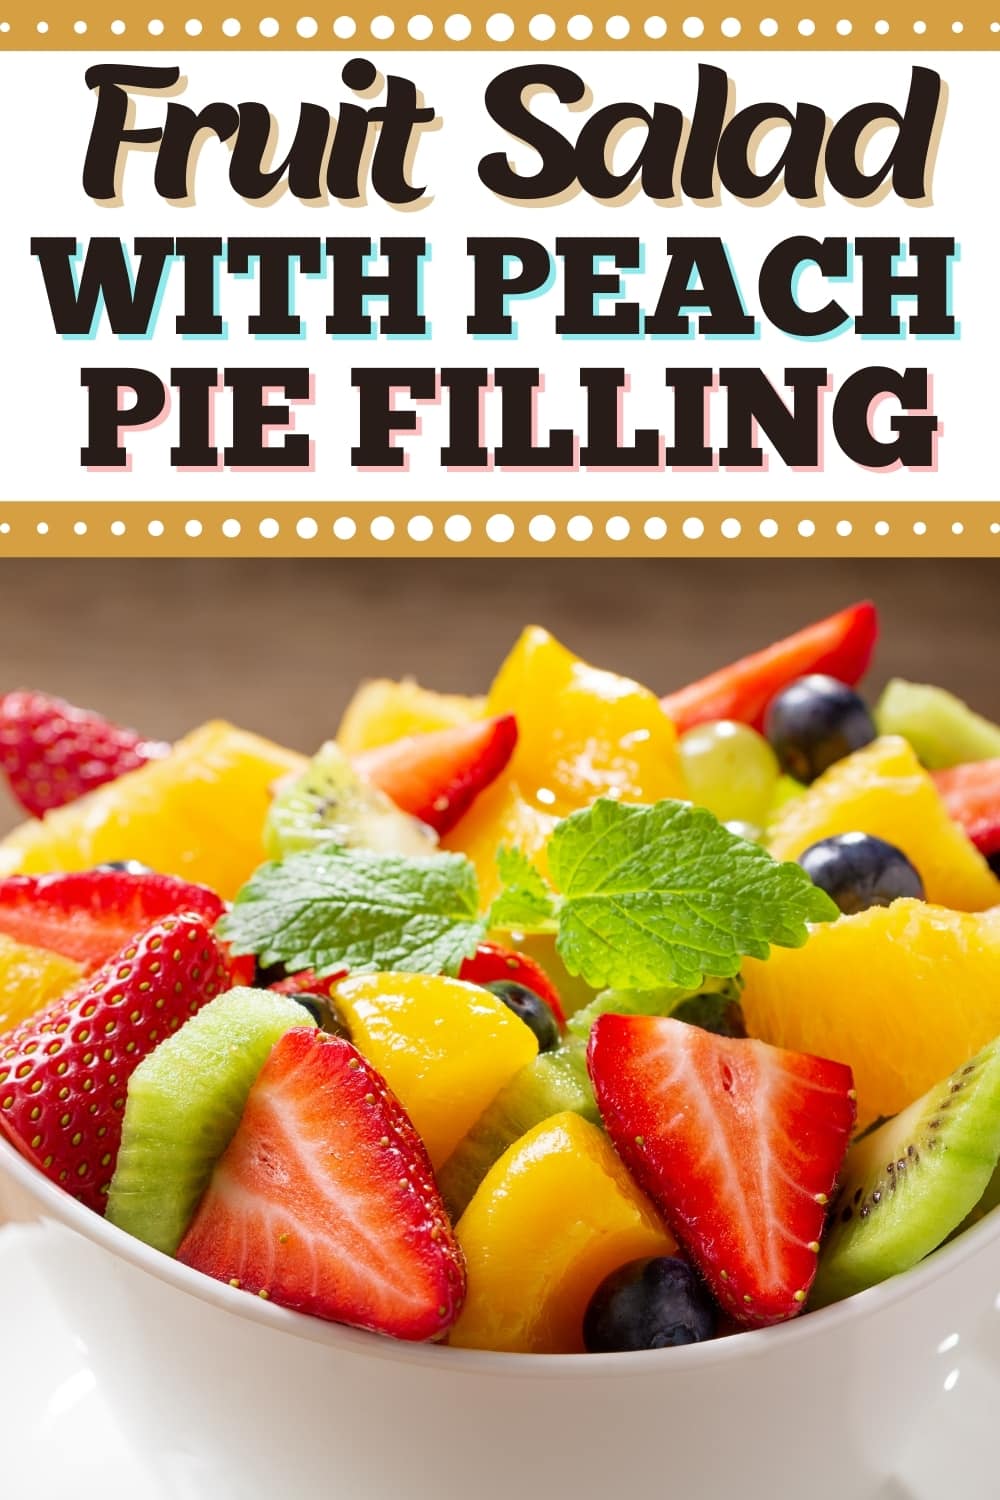 Fruit Salad With Peach Pie Filling - Insanely Good